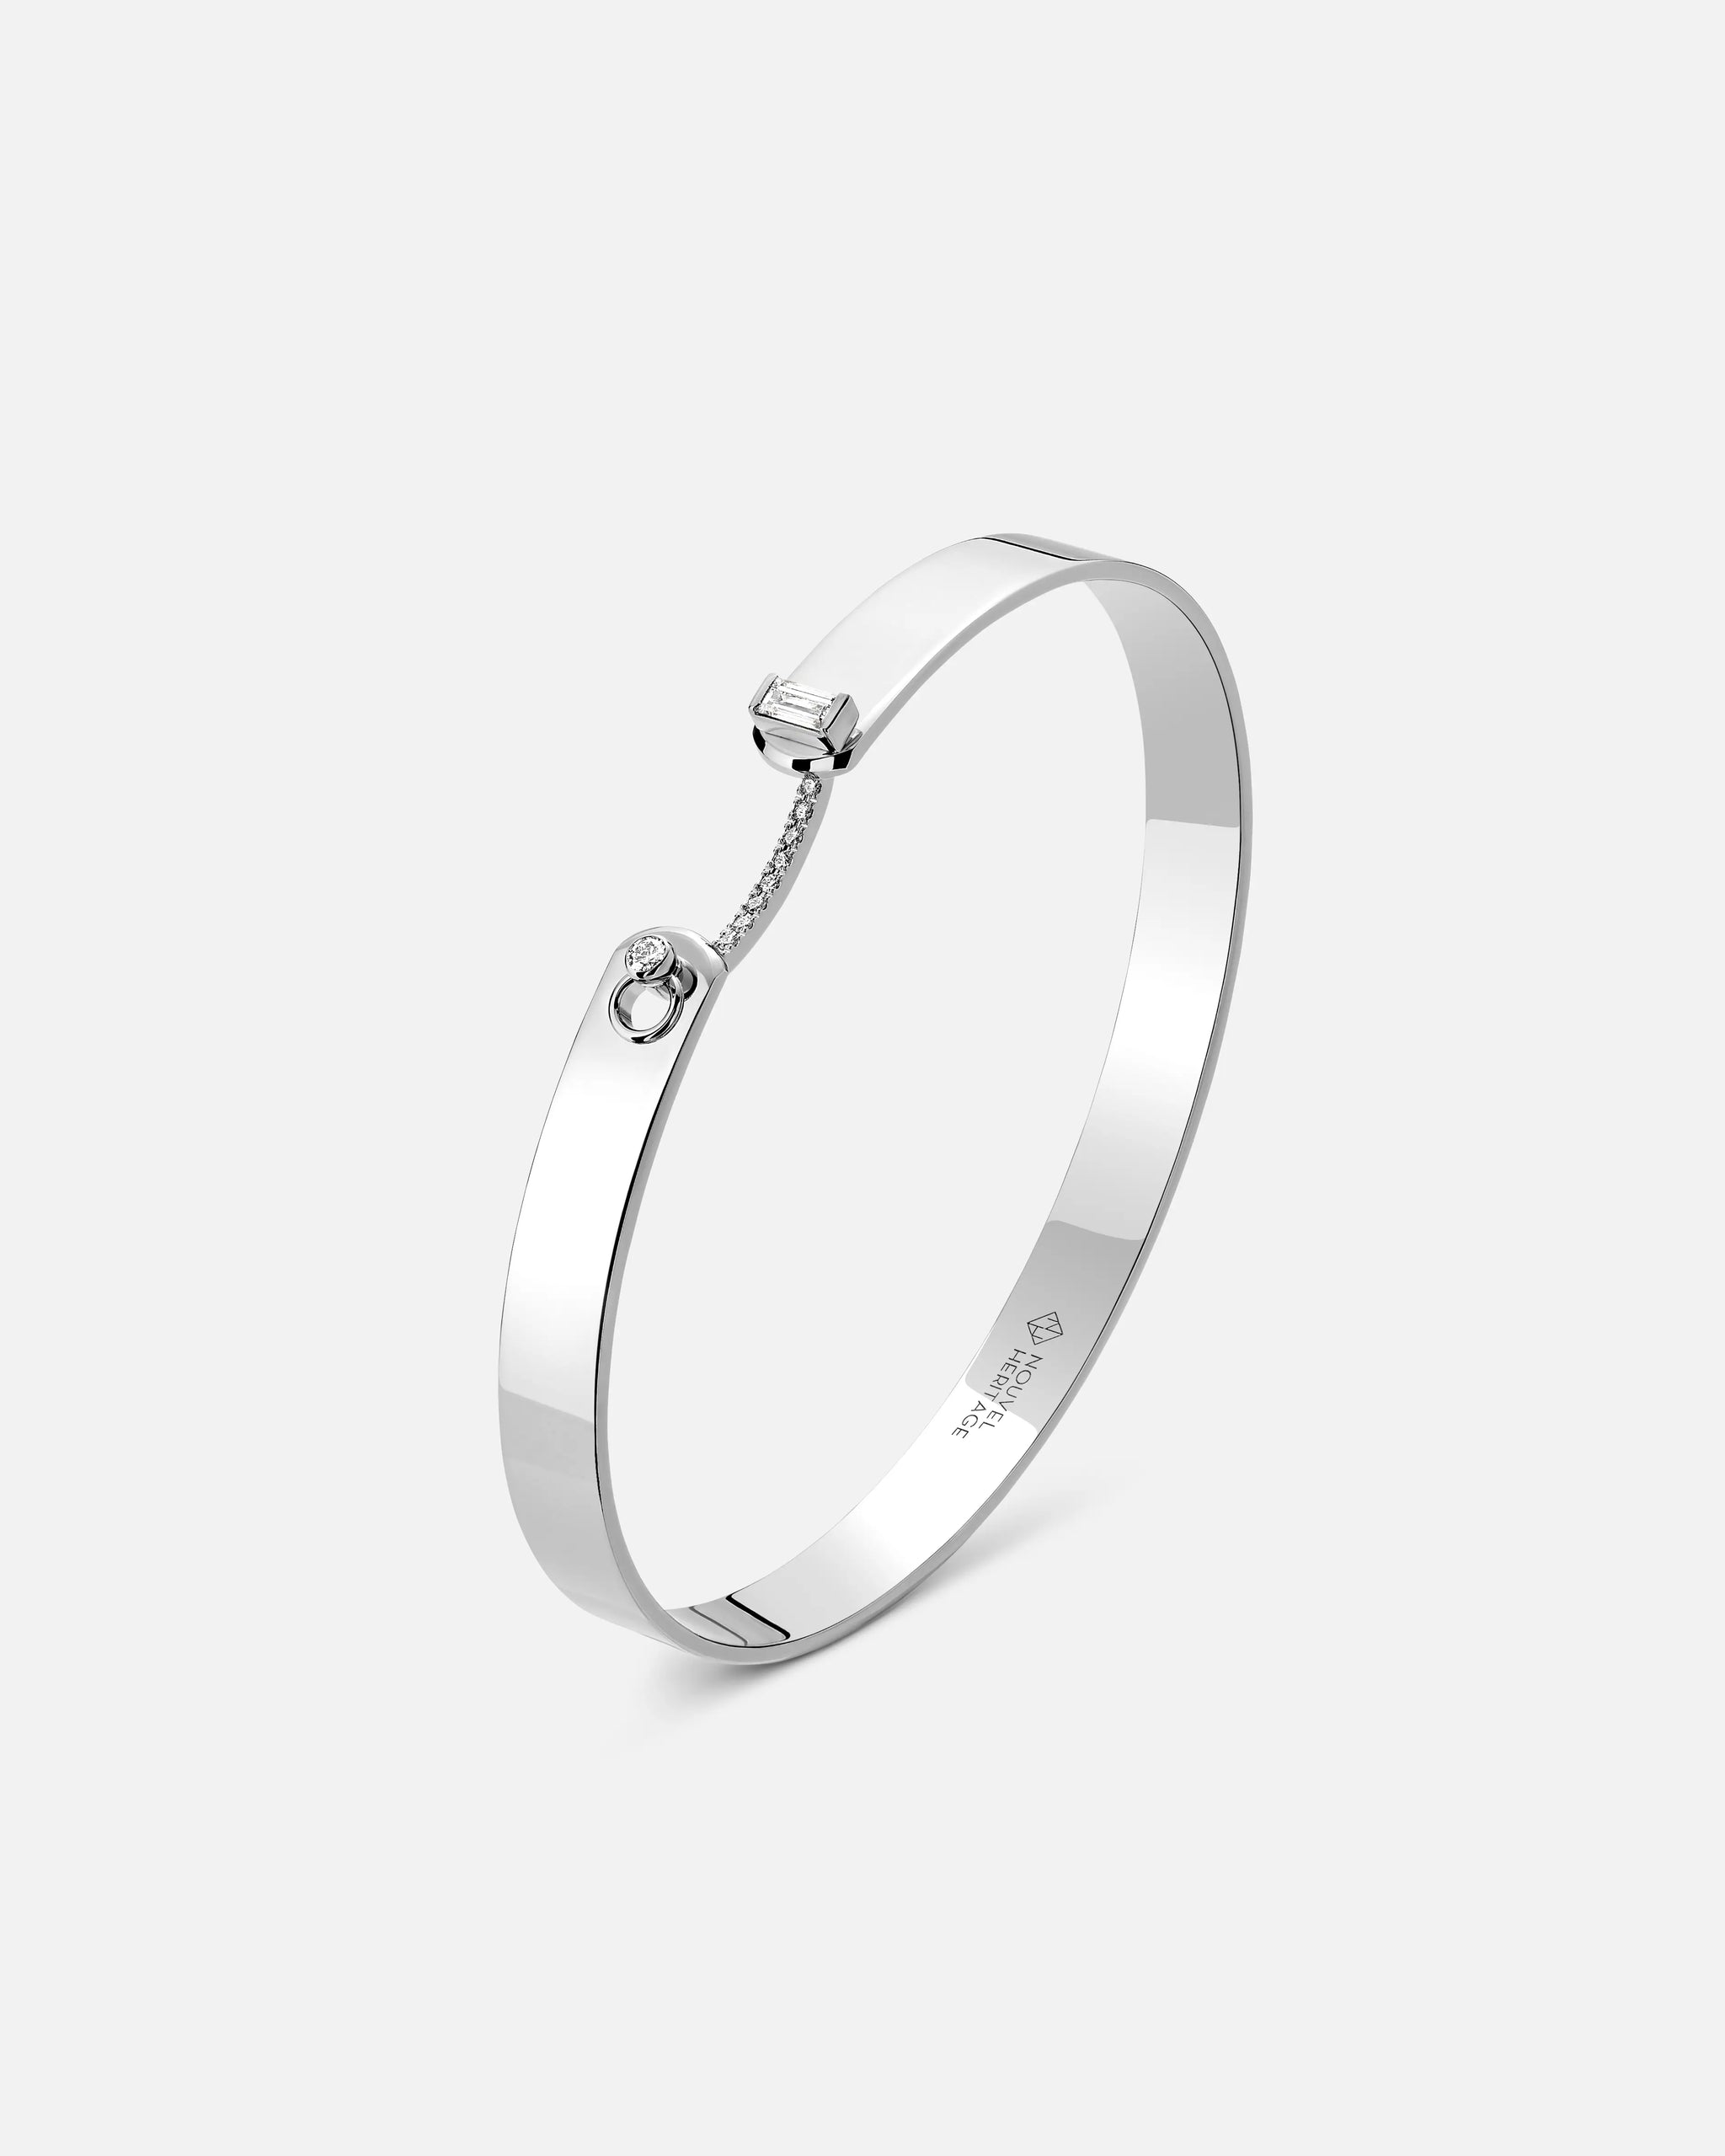 Dinner Date GM Mood Bangle in White Gold - 1 - Nouvel Heritage